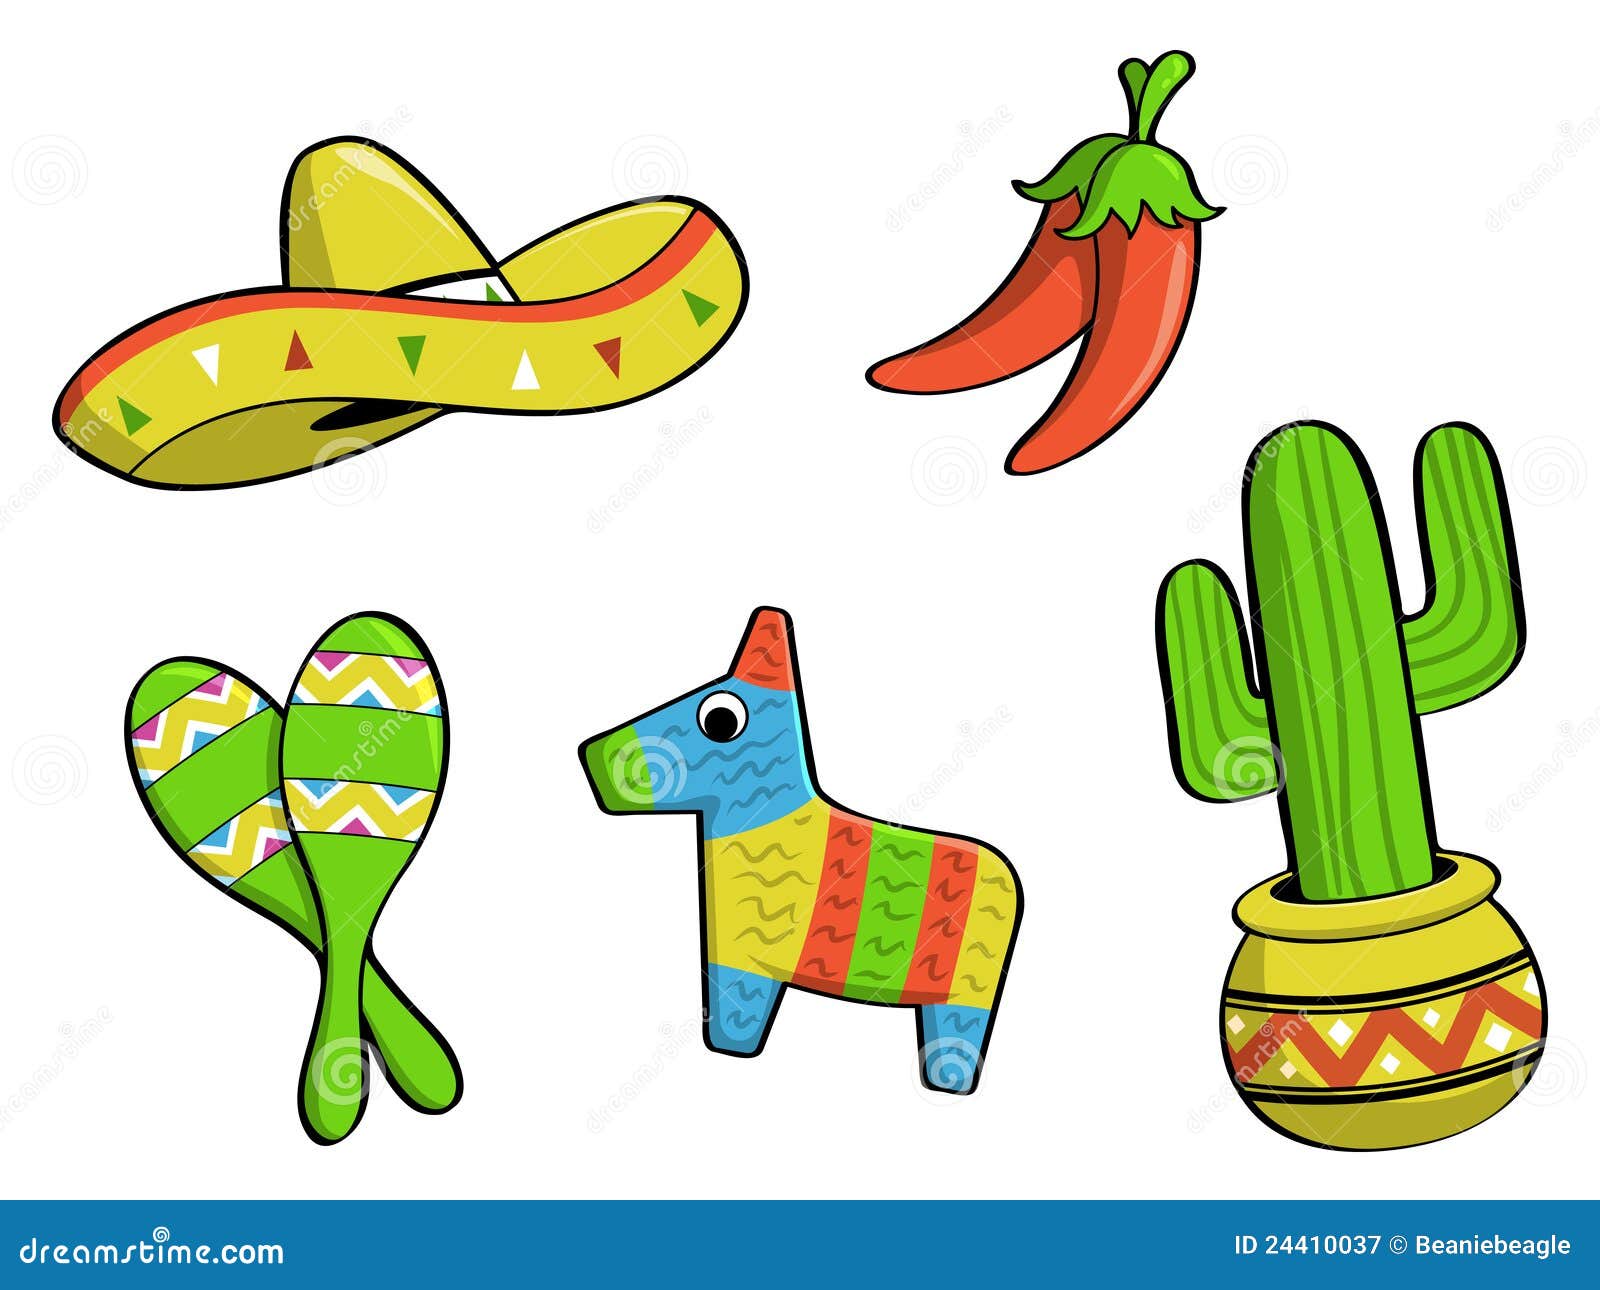 free vector mexican clipart - photo #28